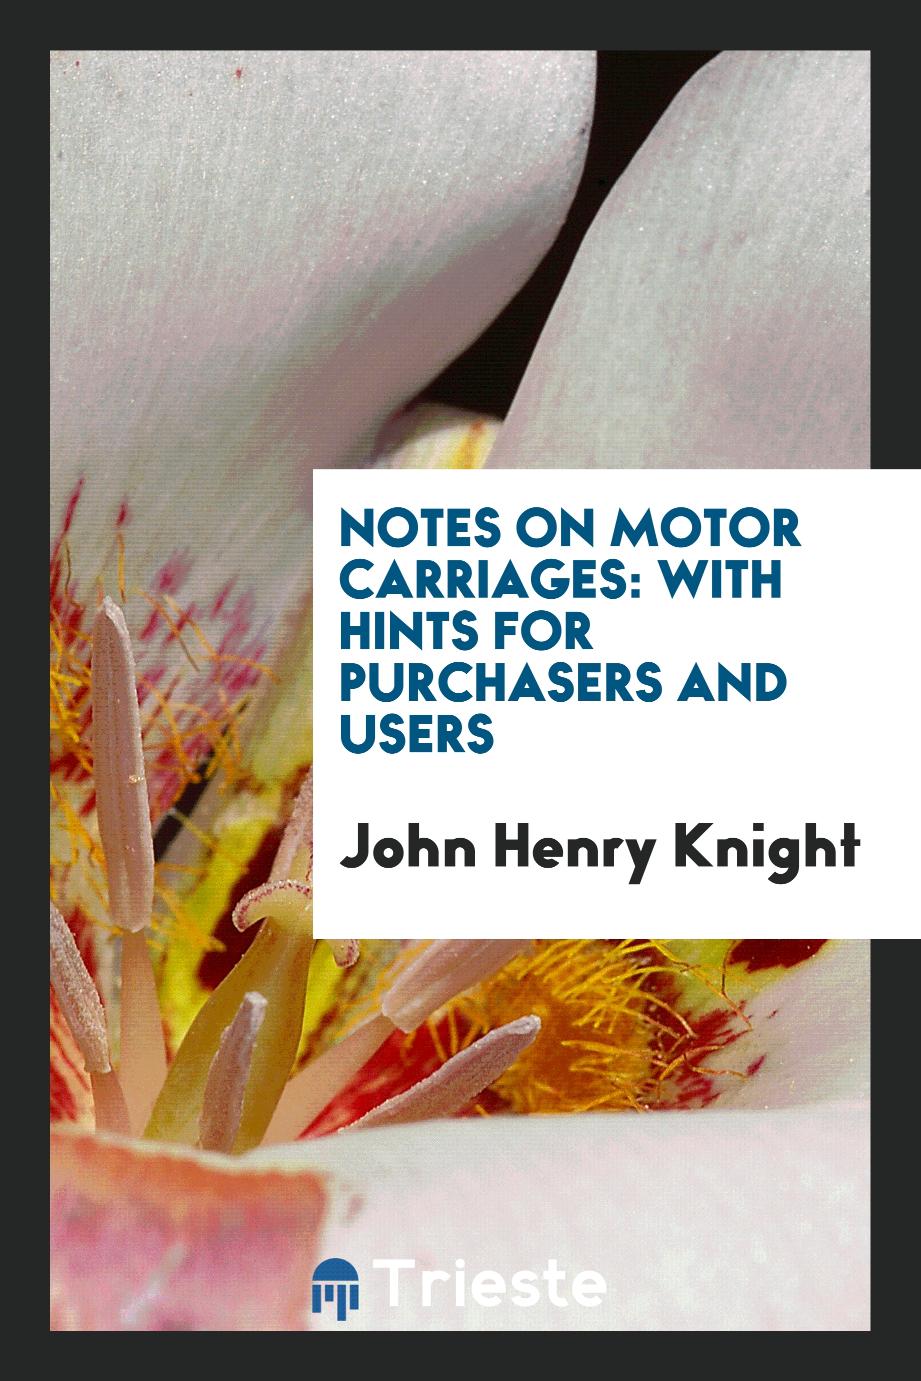 Notes on Motor Carriages: With Hints for Purchasers and Users